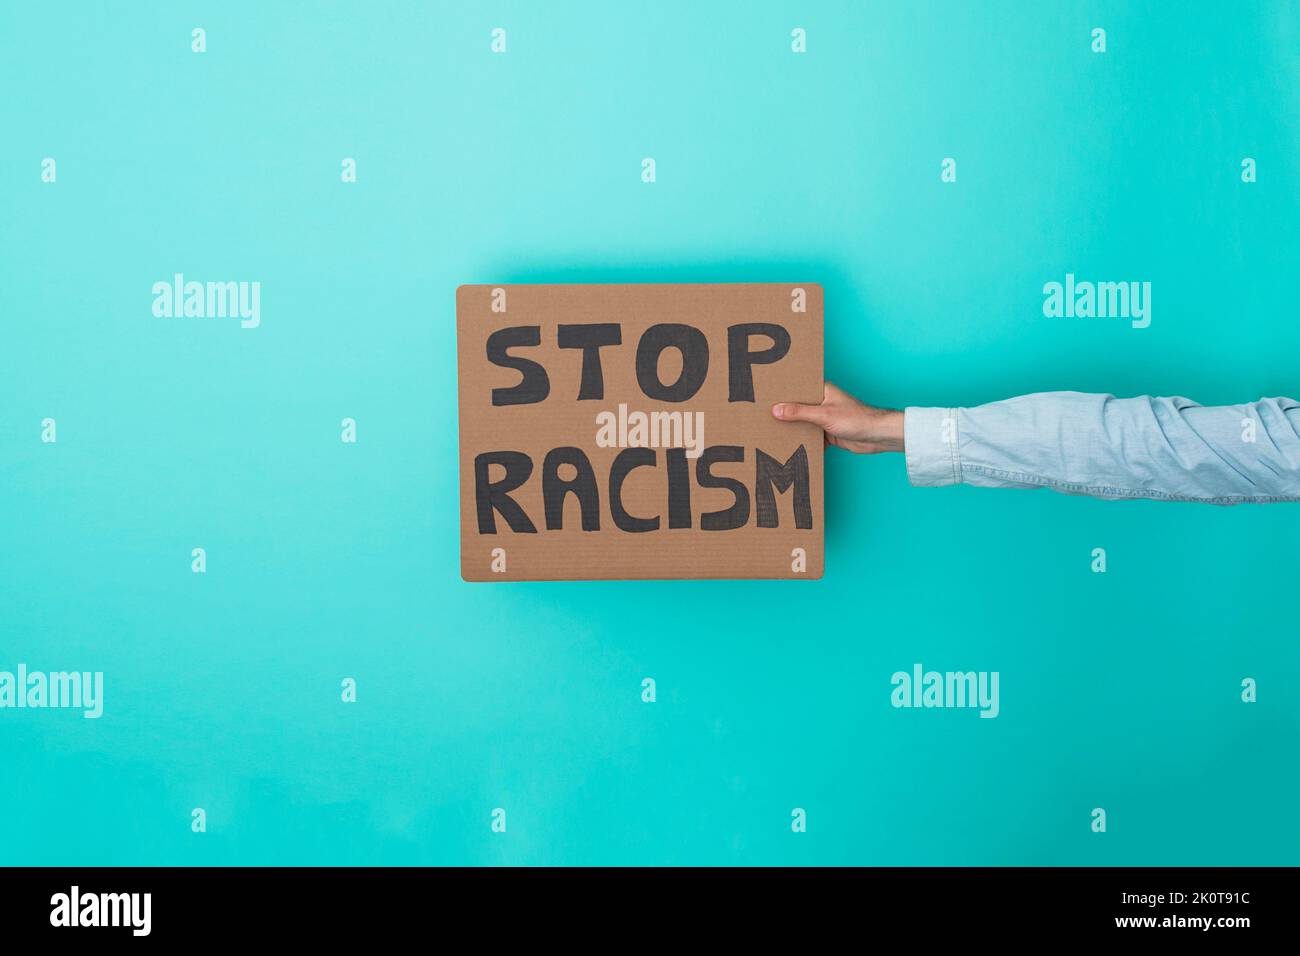 Crop anonymous person showing banner with stop racism text over blue background - Racism and equality concept Stock Photo